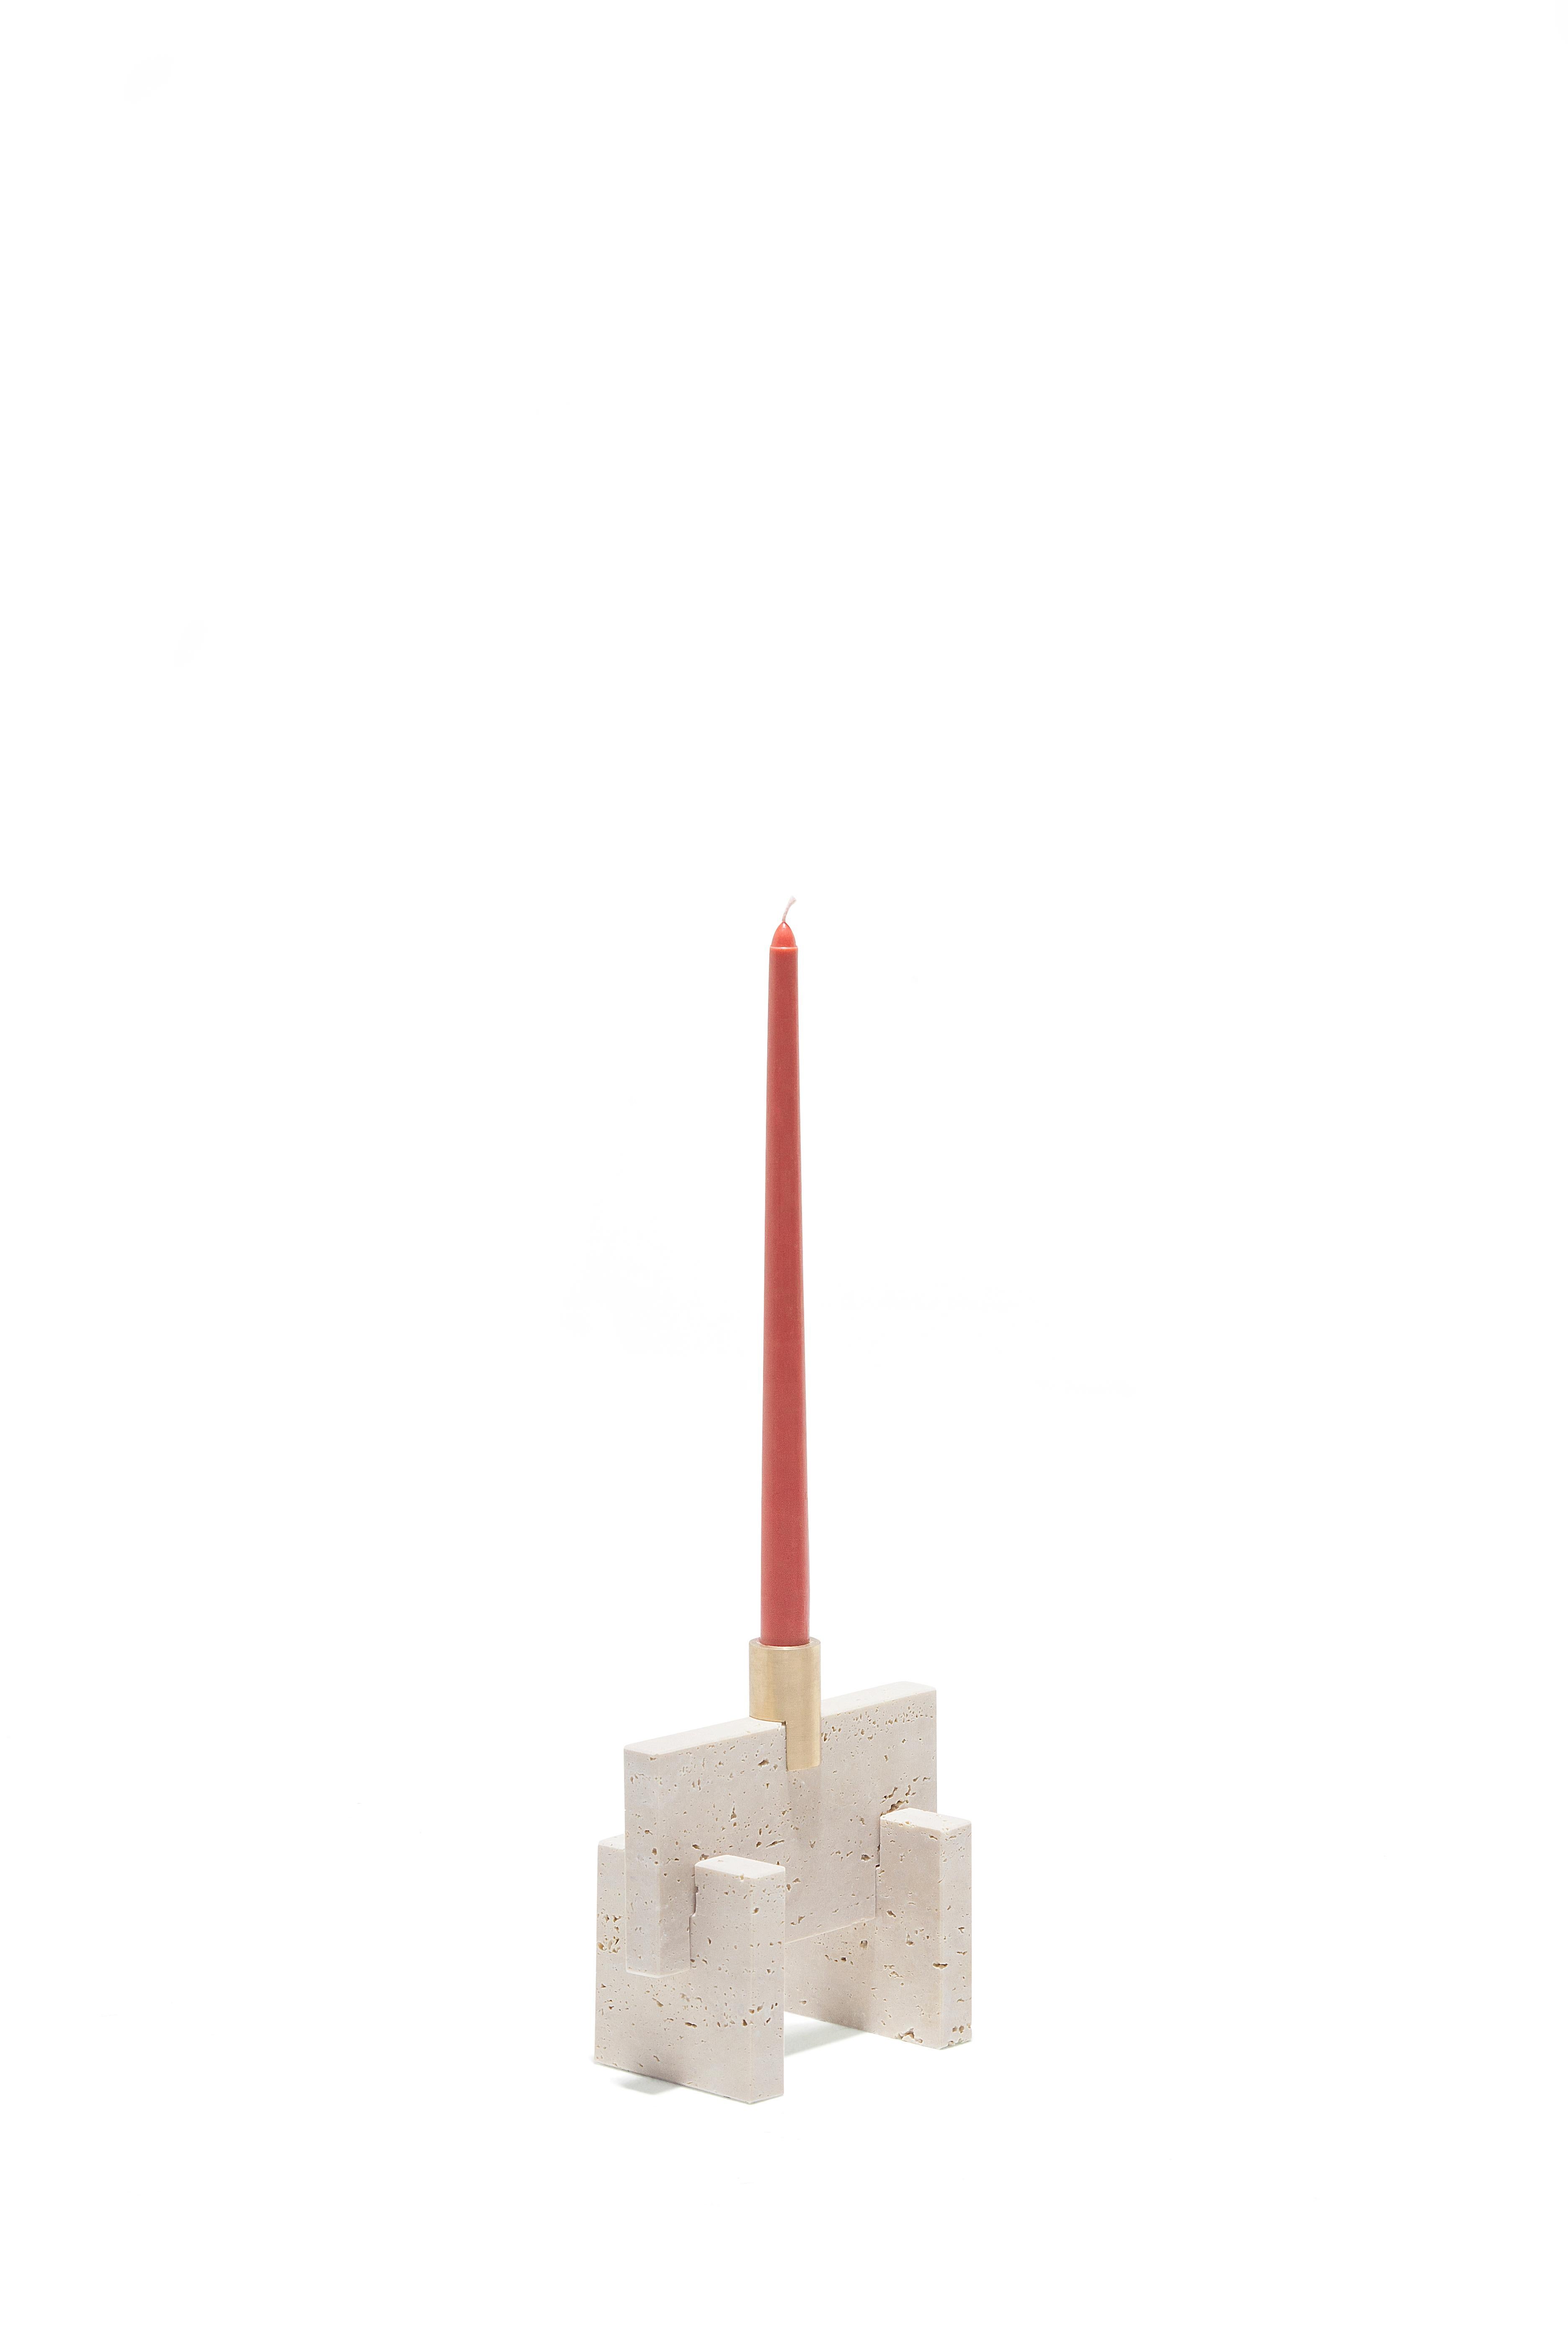 Fit candle by Joseph Vila Capdevila
Material: Travertino marble, brass
Dimensions: 17 x 17 x 9 cm
Weight: 1.7 kg 


Aparentment is a space for creation and innovation, experimenting with materials with the goal to develop robust, lasting and